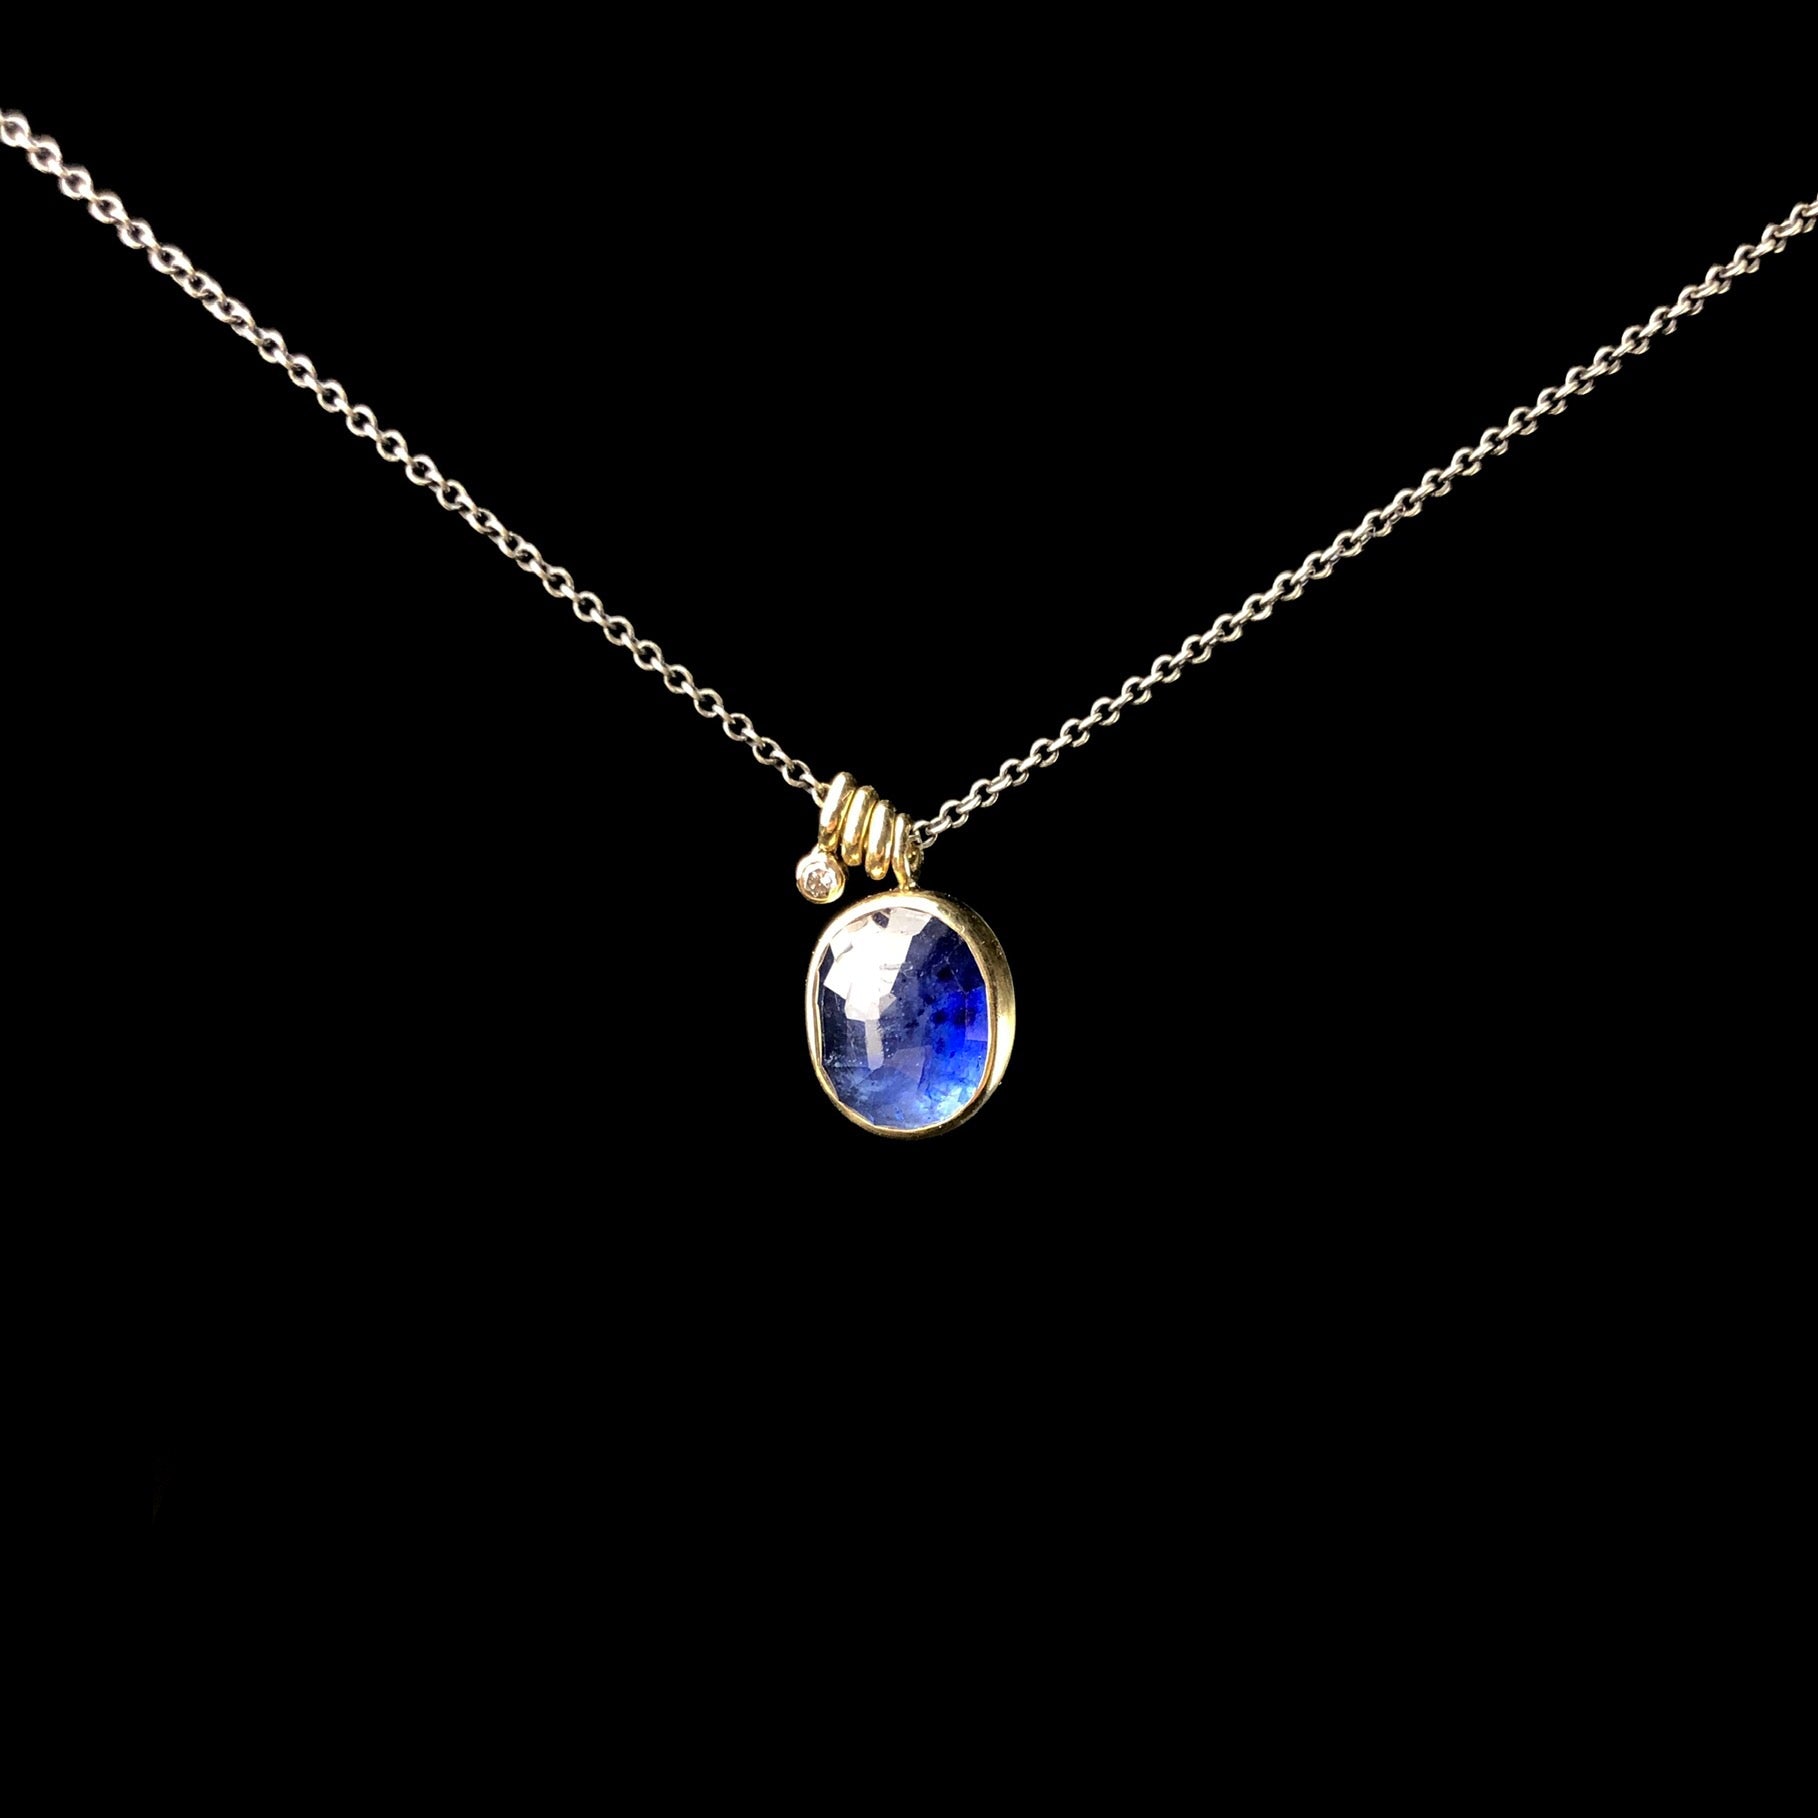 Blue oval stone with gold setting on blackened silver chain with gold accents and diamond